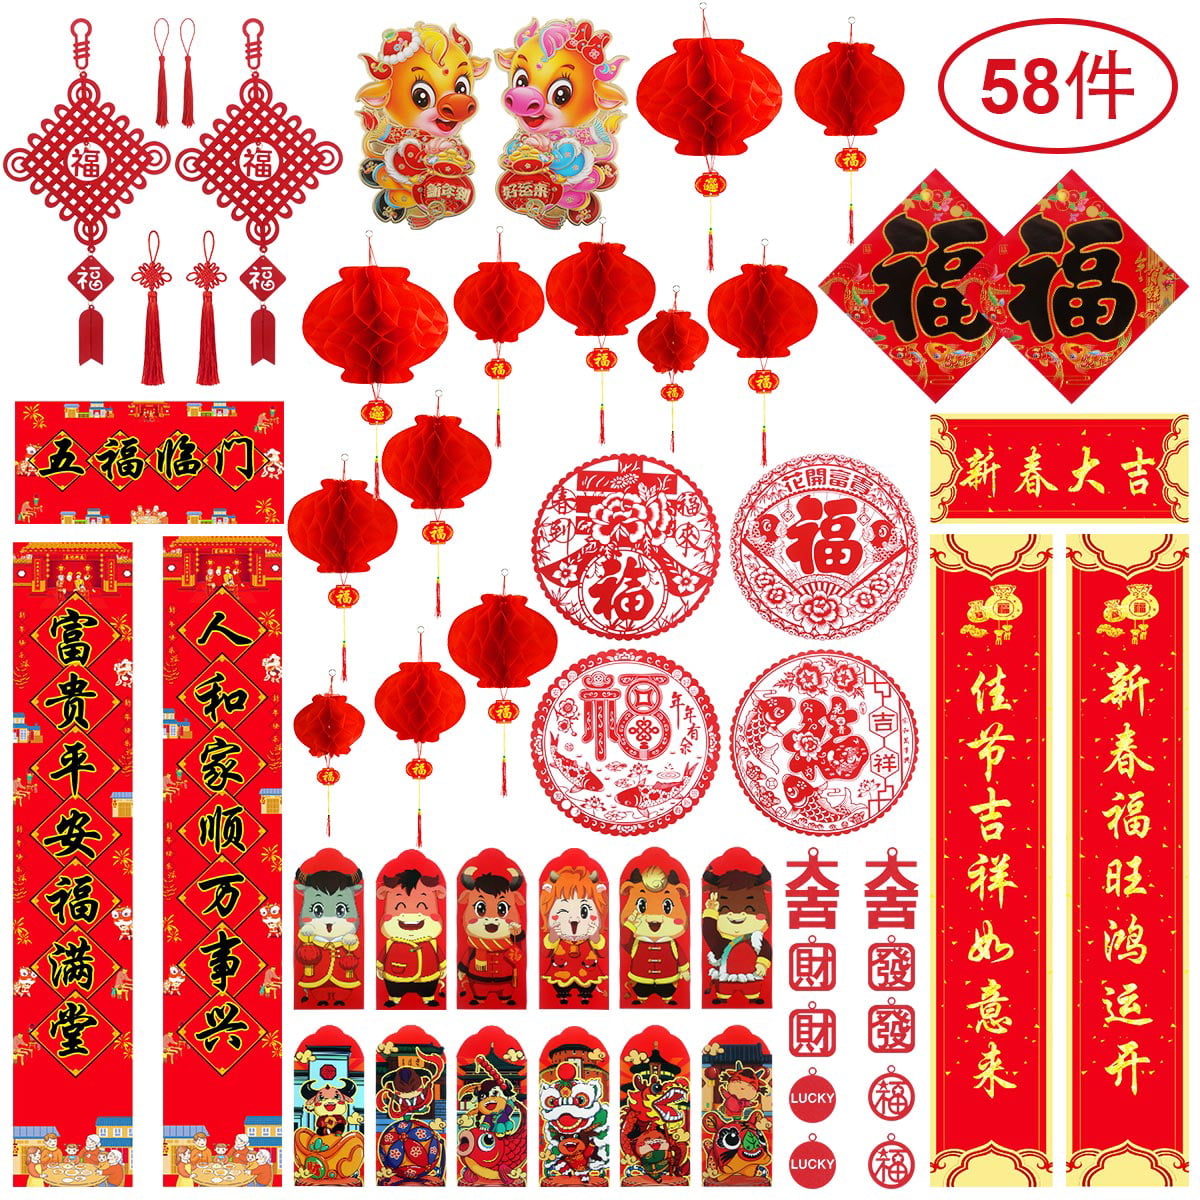 Classic God of Wealth N&T NIETING 2021 Spring Festival Couplets Chinese Blessings Red Lanterns Lion Head Chinese New Year Decorations Chinese New Year Banner